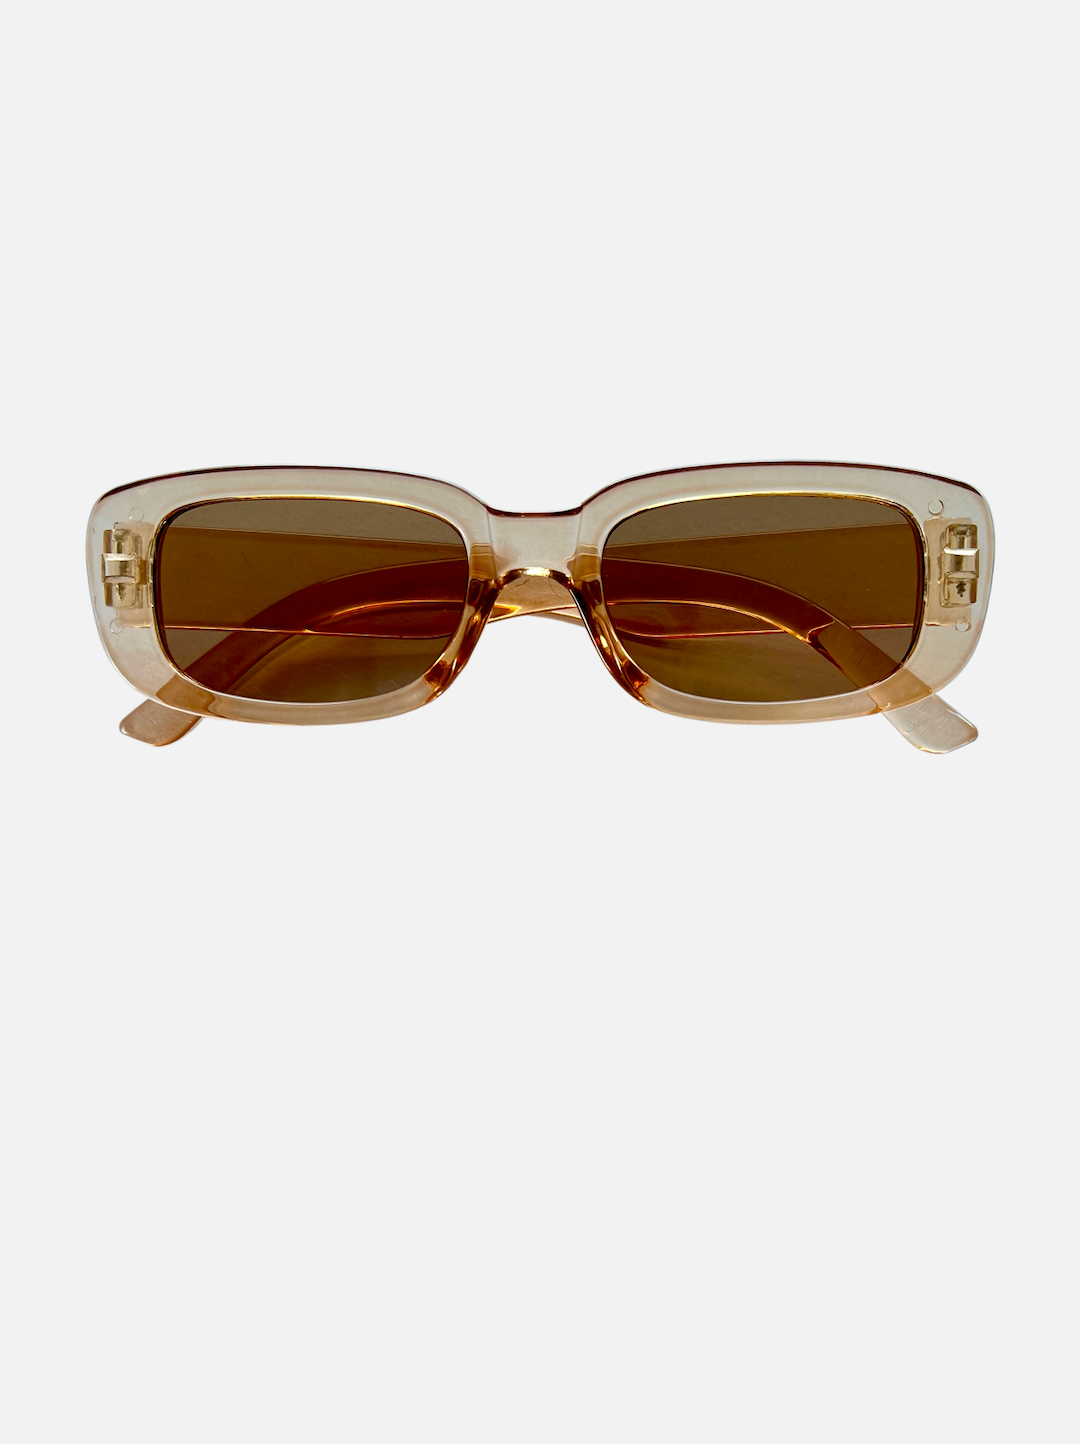 A pair of kids' sunglasses with translucent frames and brown lenese